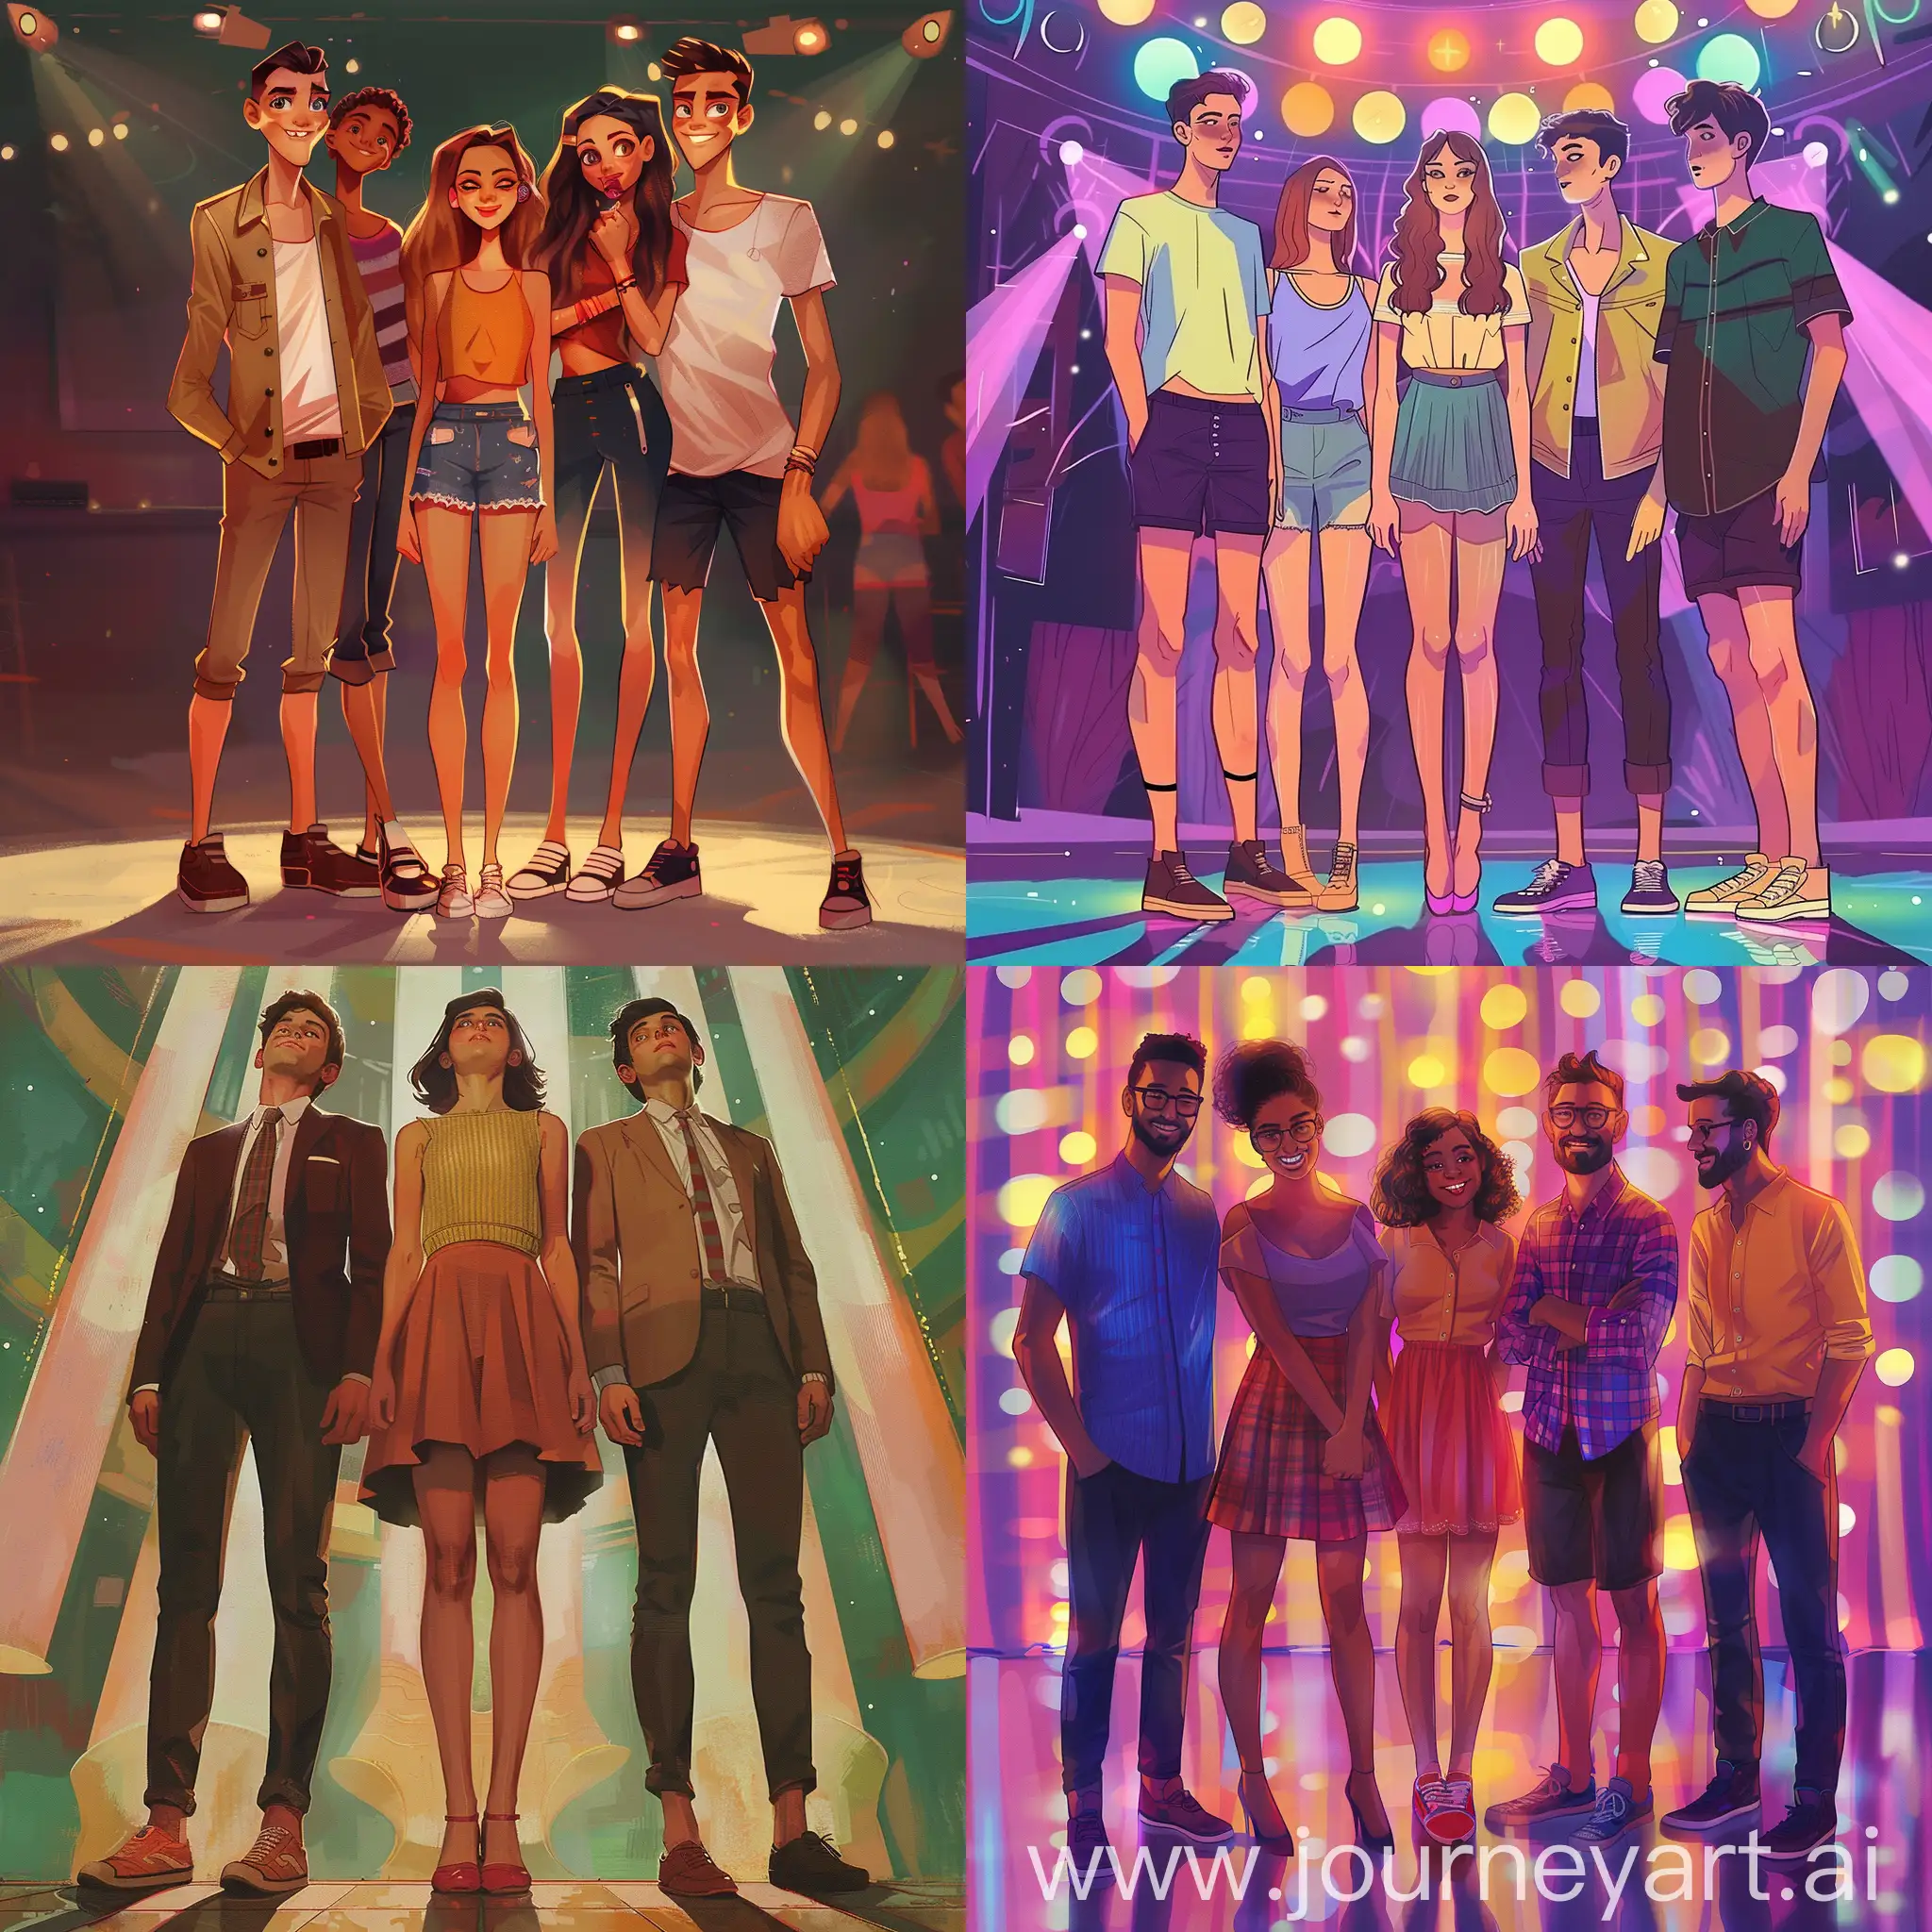 Group-of-Five-Dancing-at-Disco-with-Central-Girl-in-CartoonRealism-Style